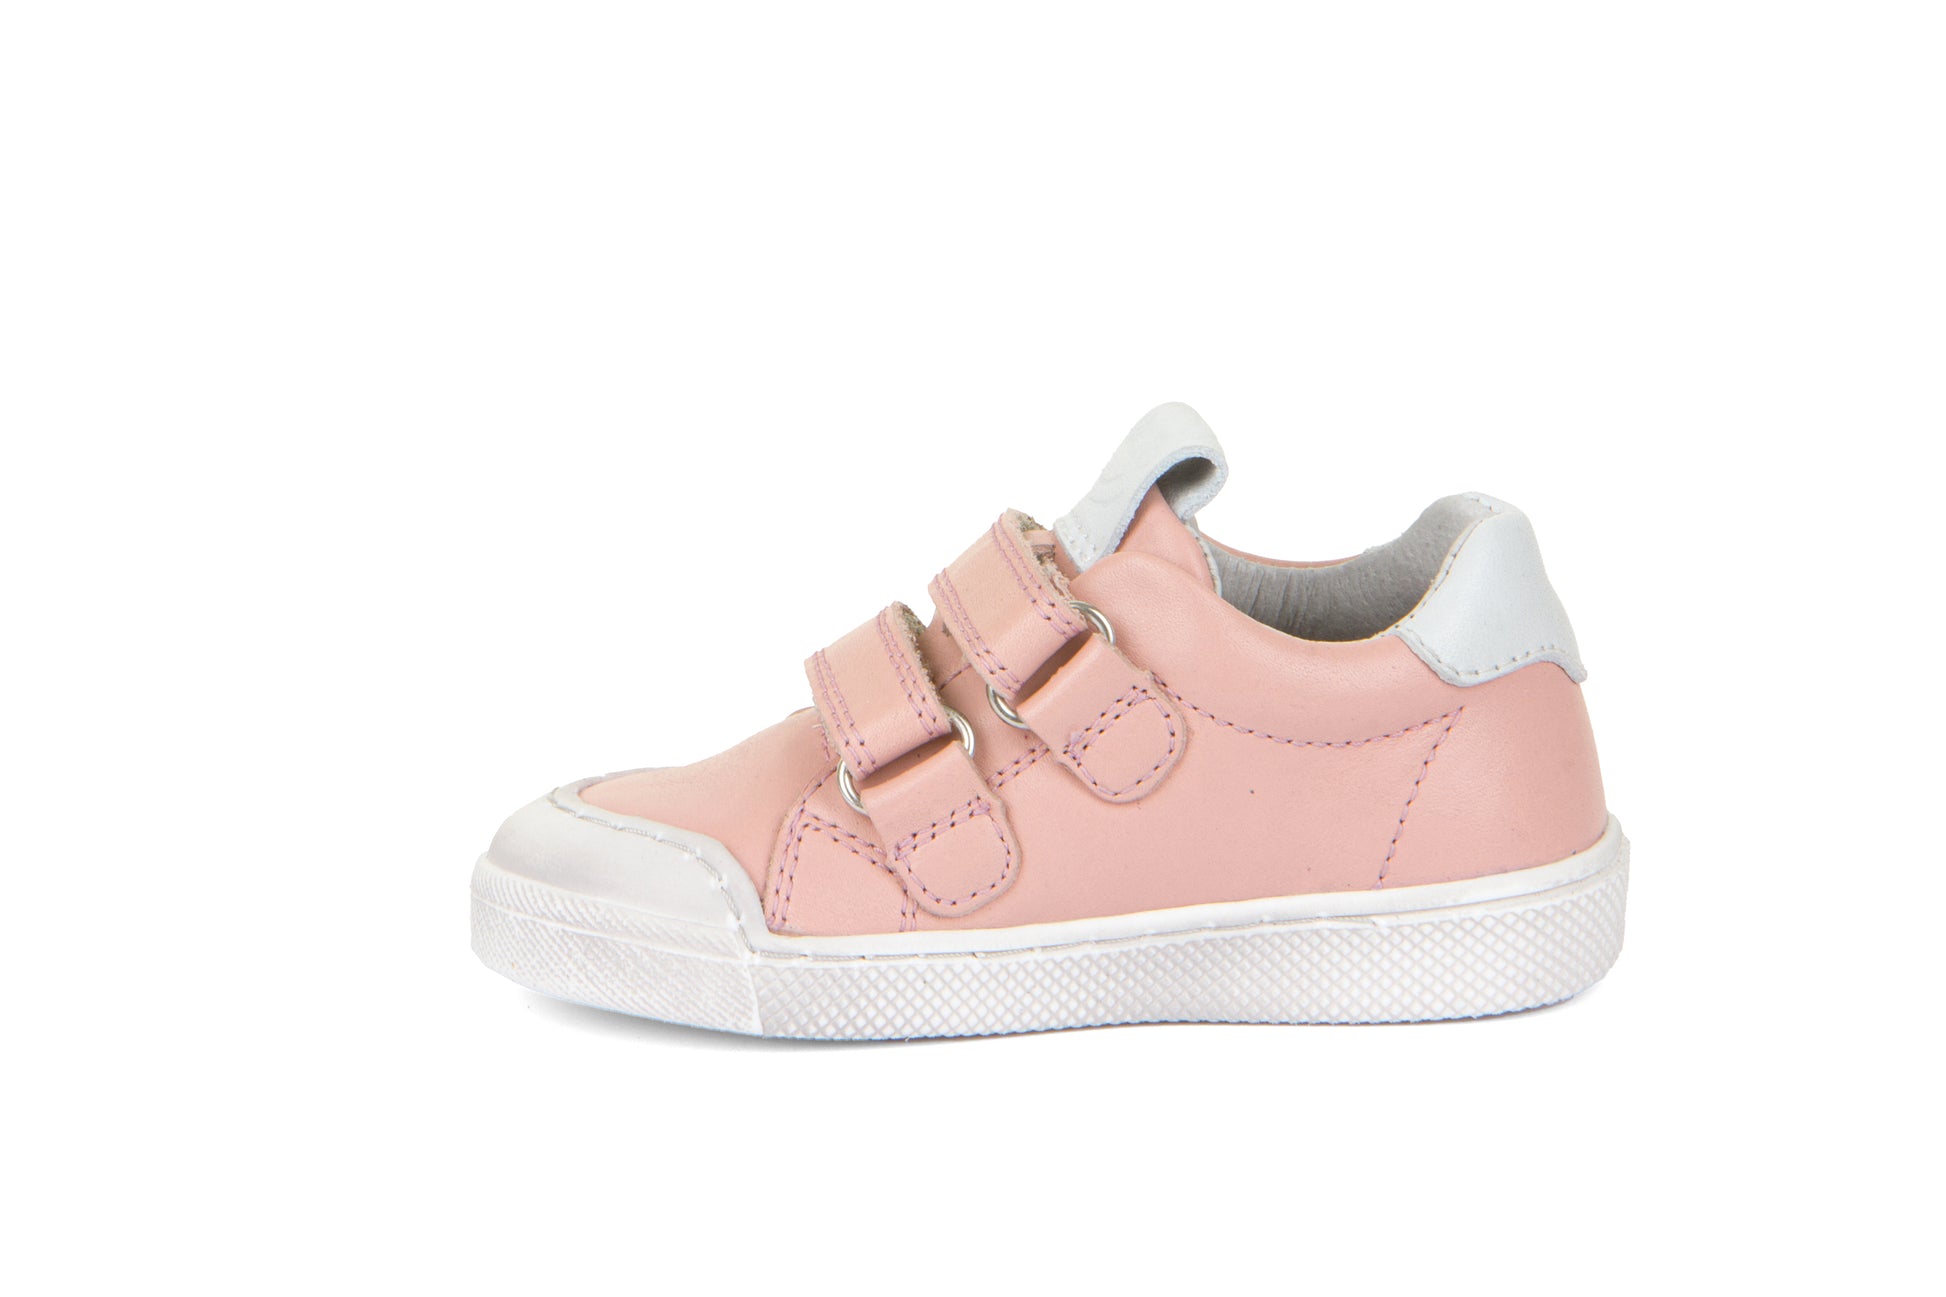 A girls casual shoe by Froddo, style G2130290-4 Rosario, in pink with white trim, velcro fastening. Right inside view.